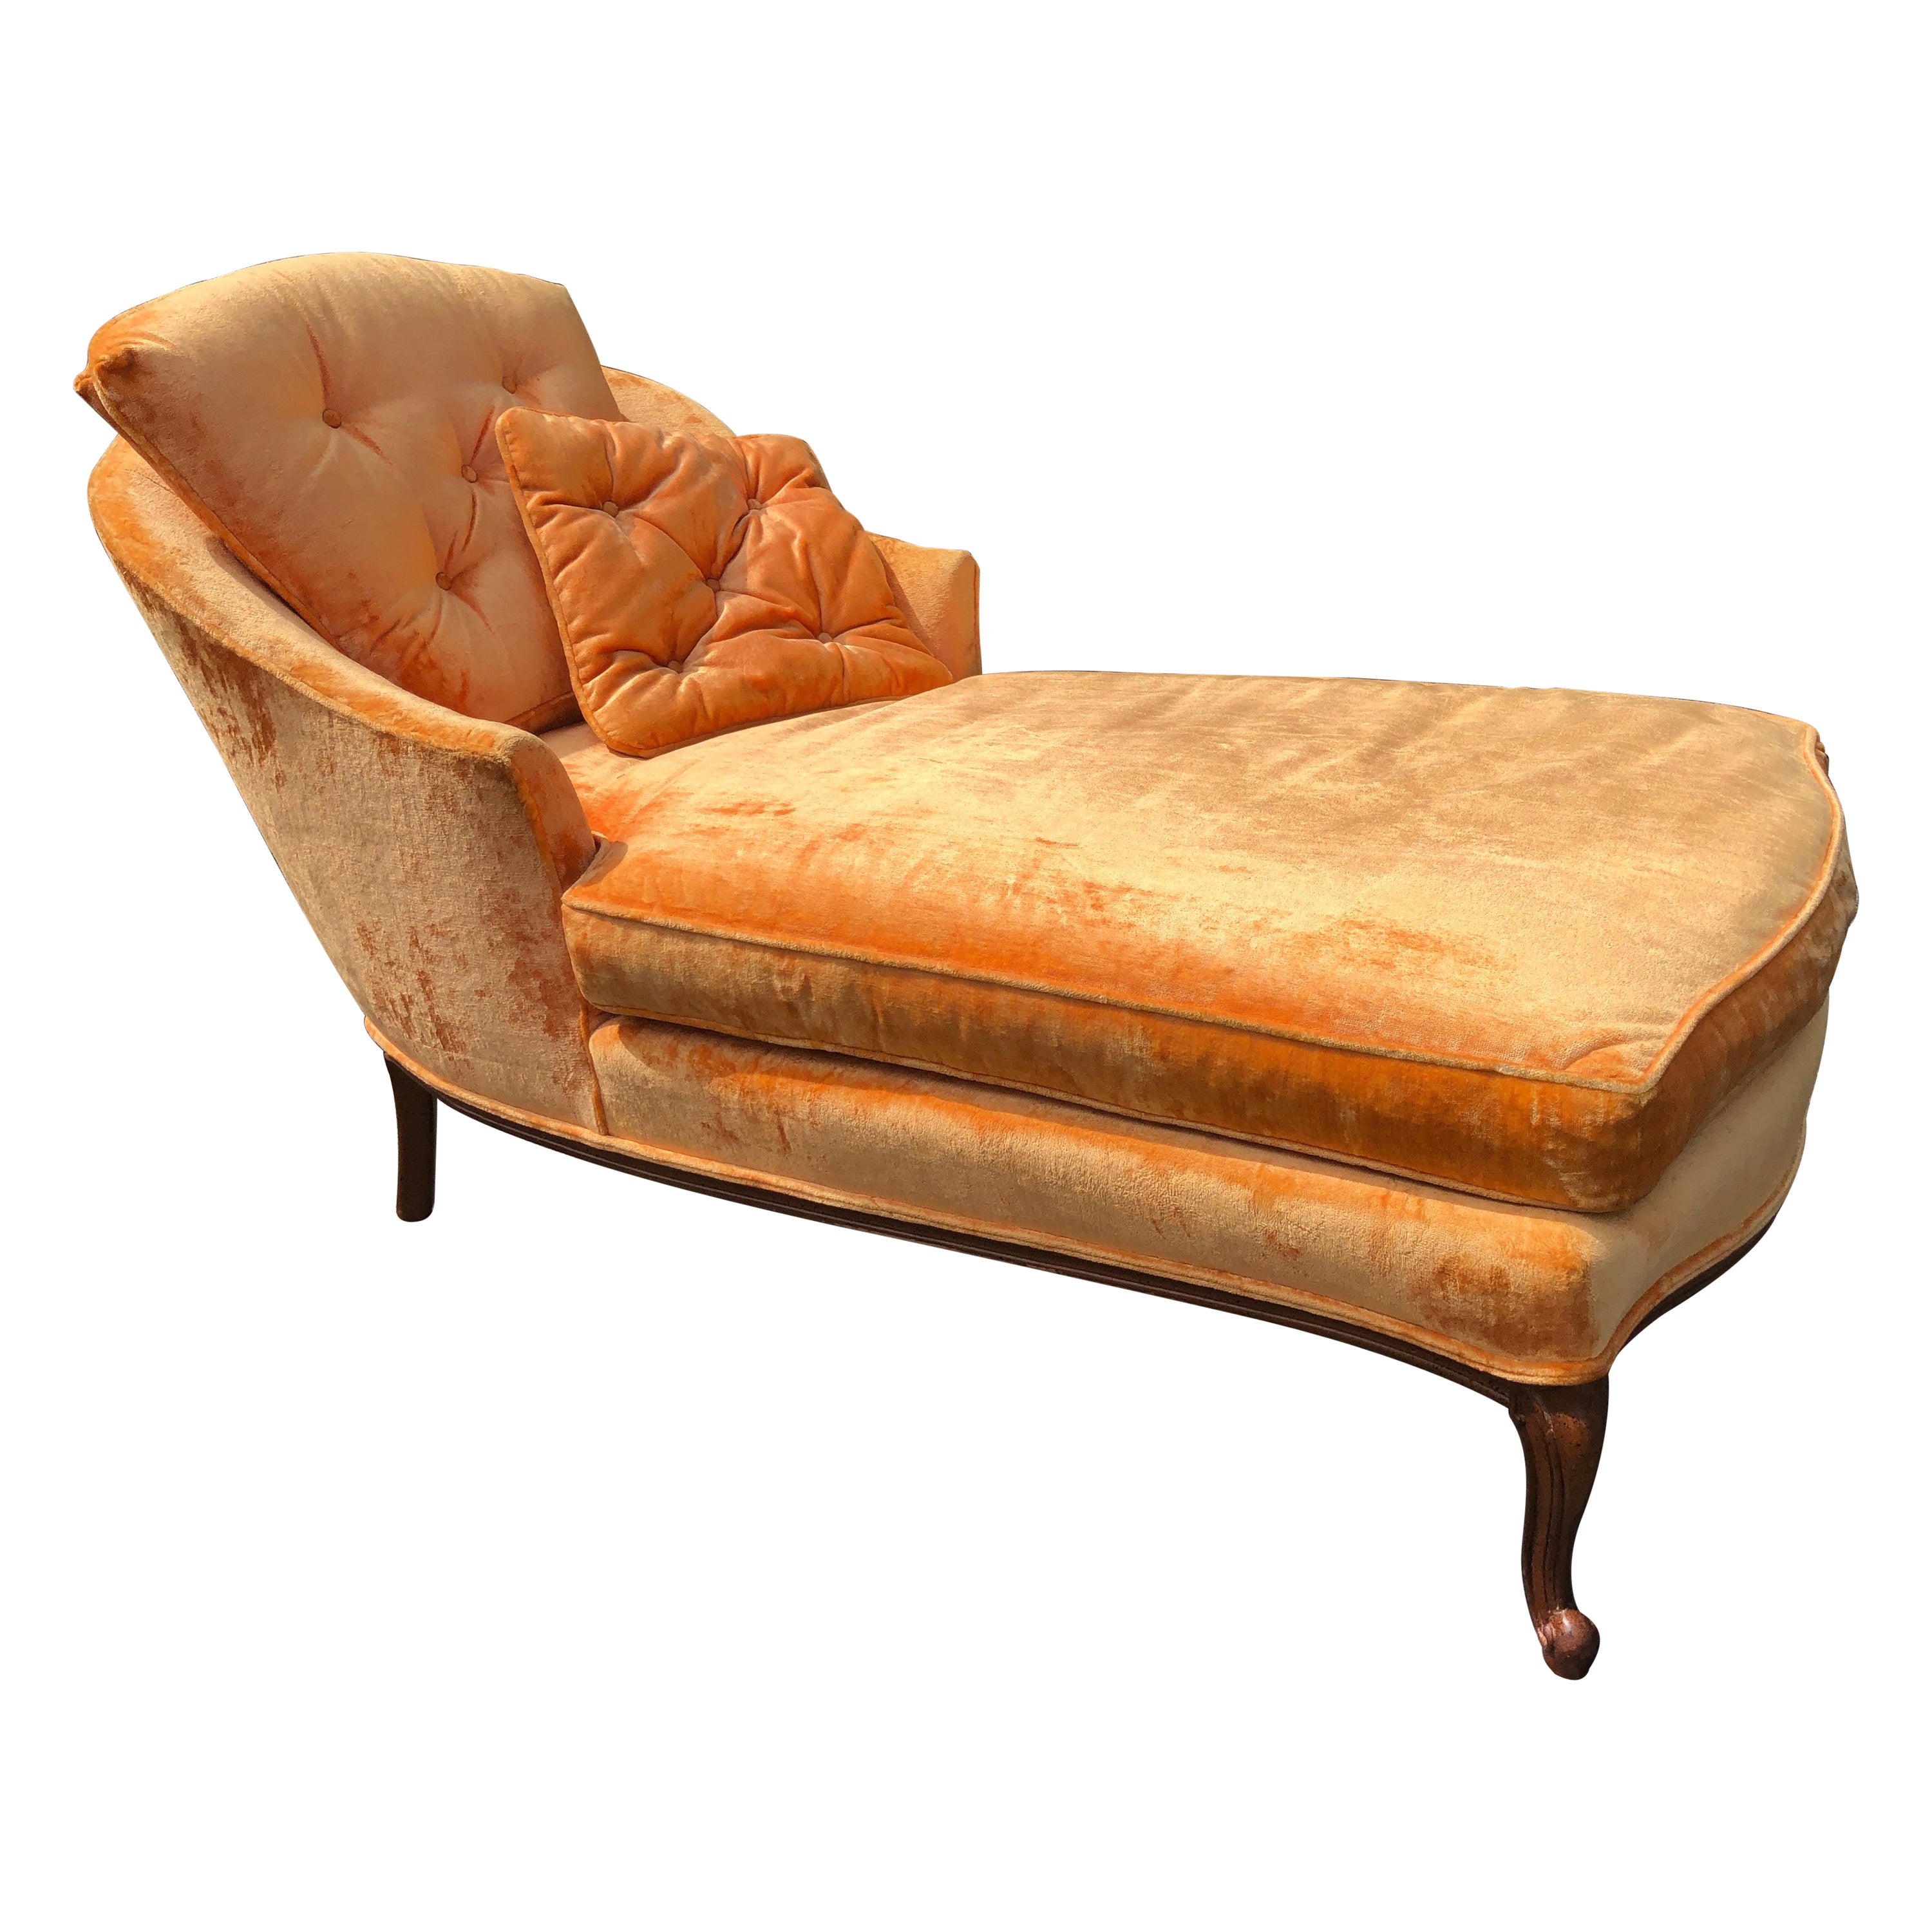 Sensational Petite French Provincial Chaise Lounge Mid-Century  For Sale